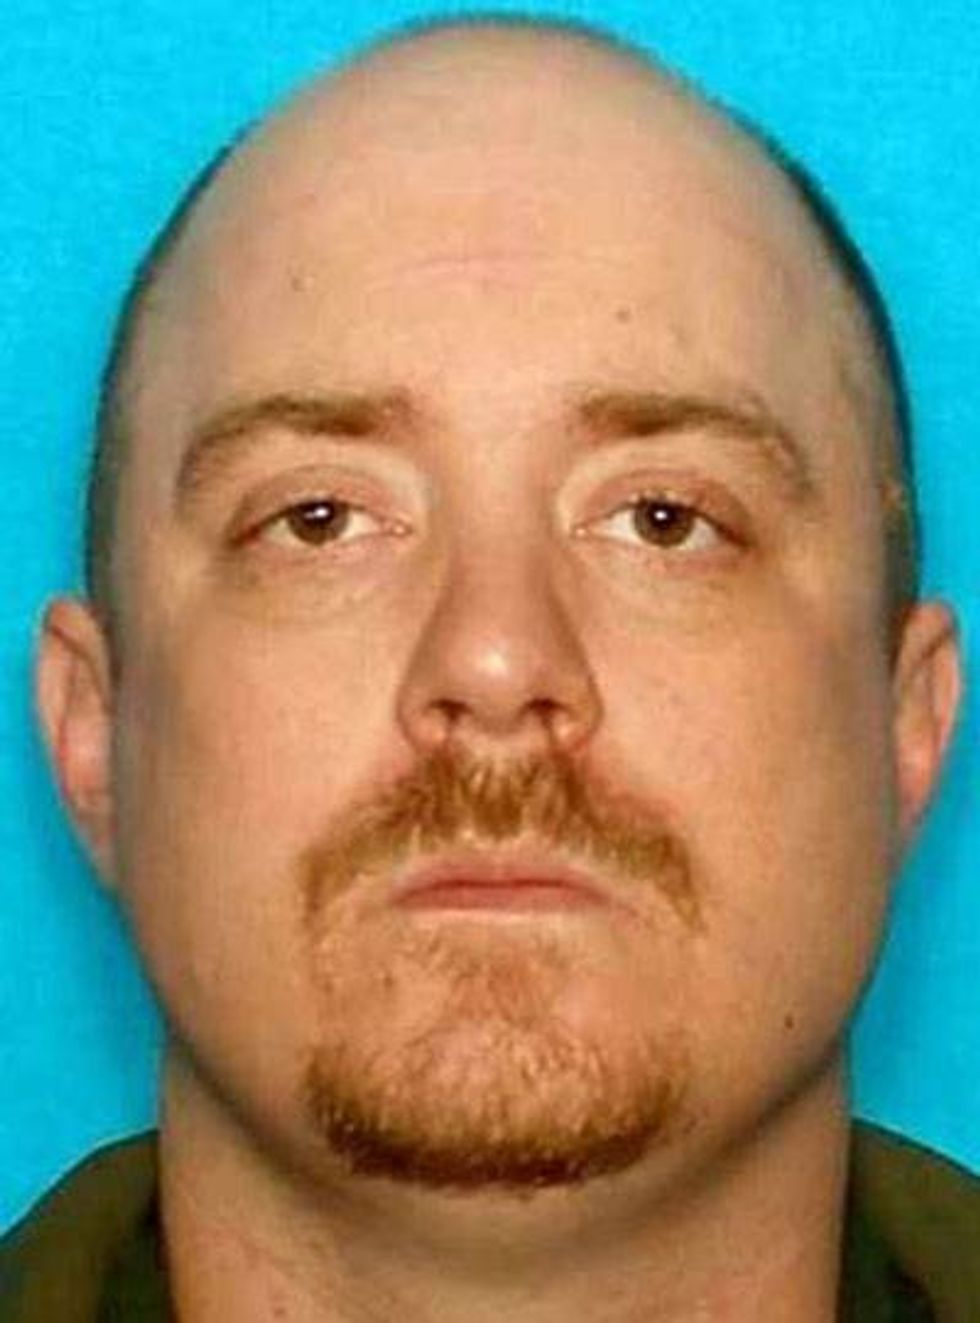 Dallas Shootout Suspect Is Dead — Here's Everything We Know About the Reported Gunman